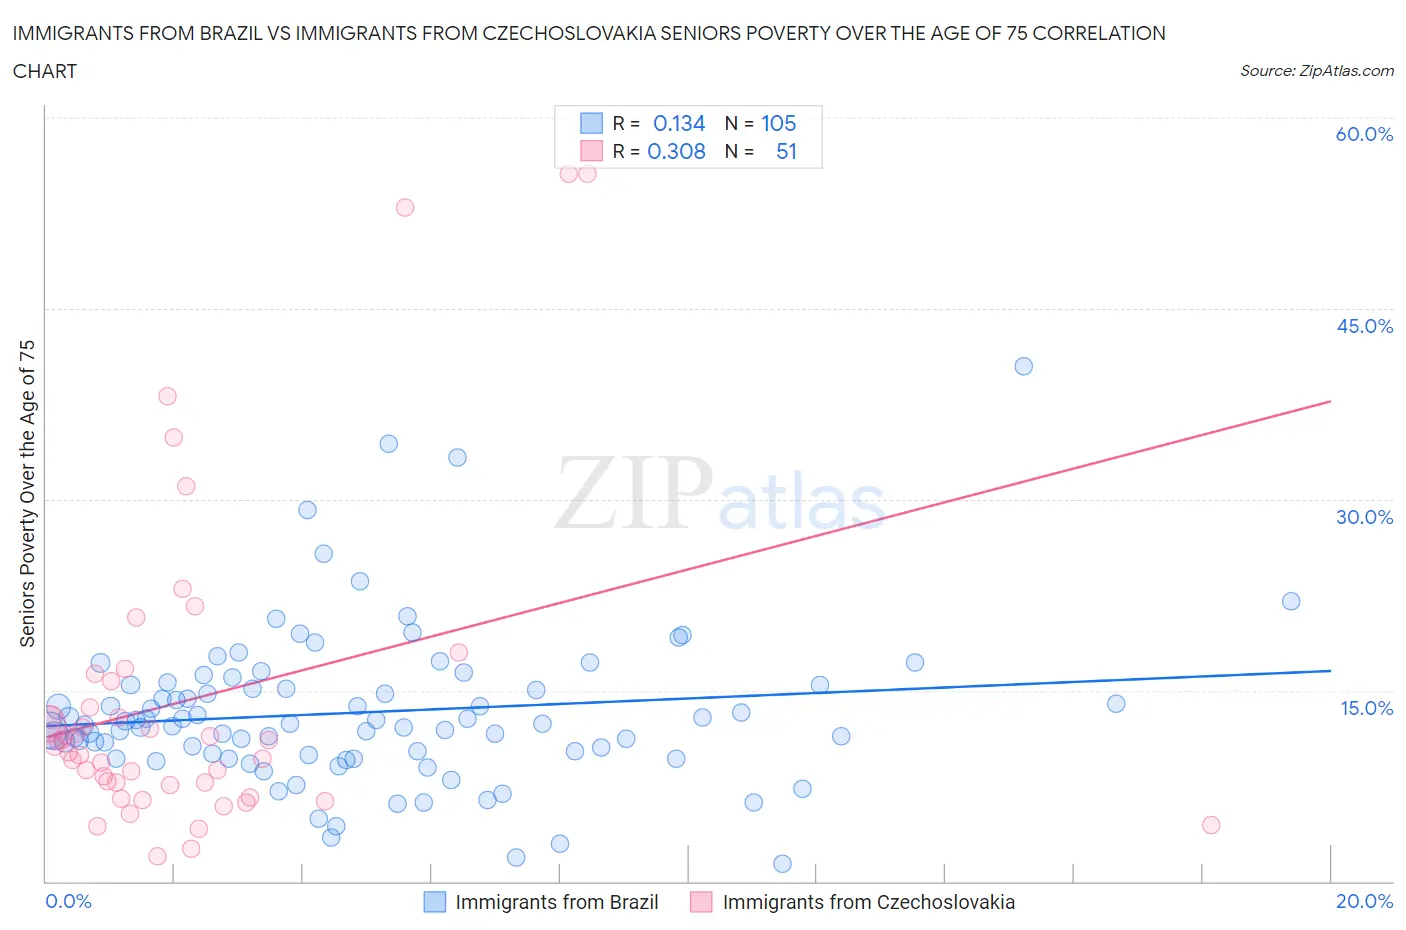 Immigrants from Brazil vs Immigrants from Czechoslovakia Seniors Poverty Over the Age of 75